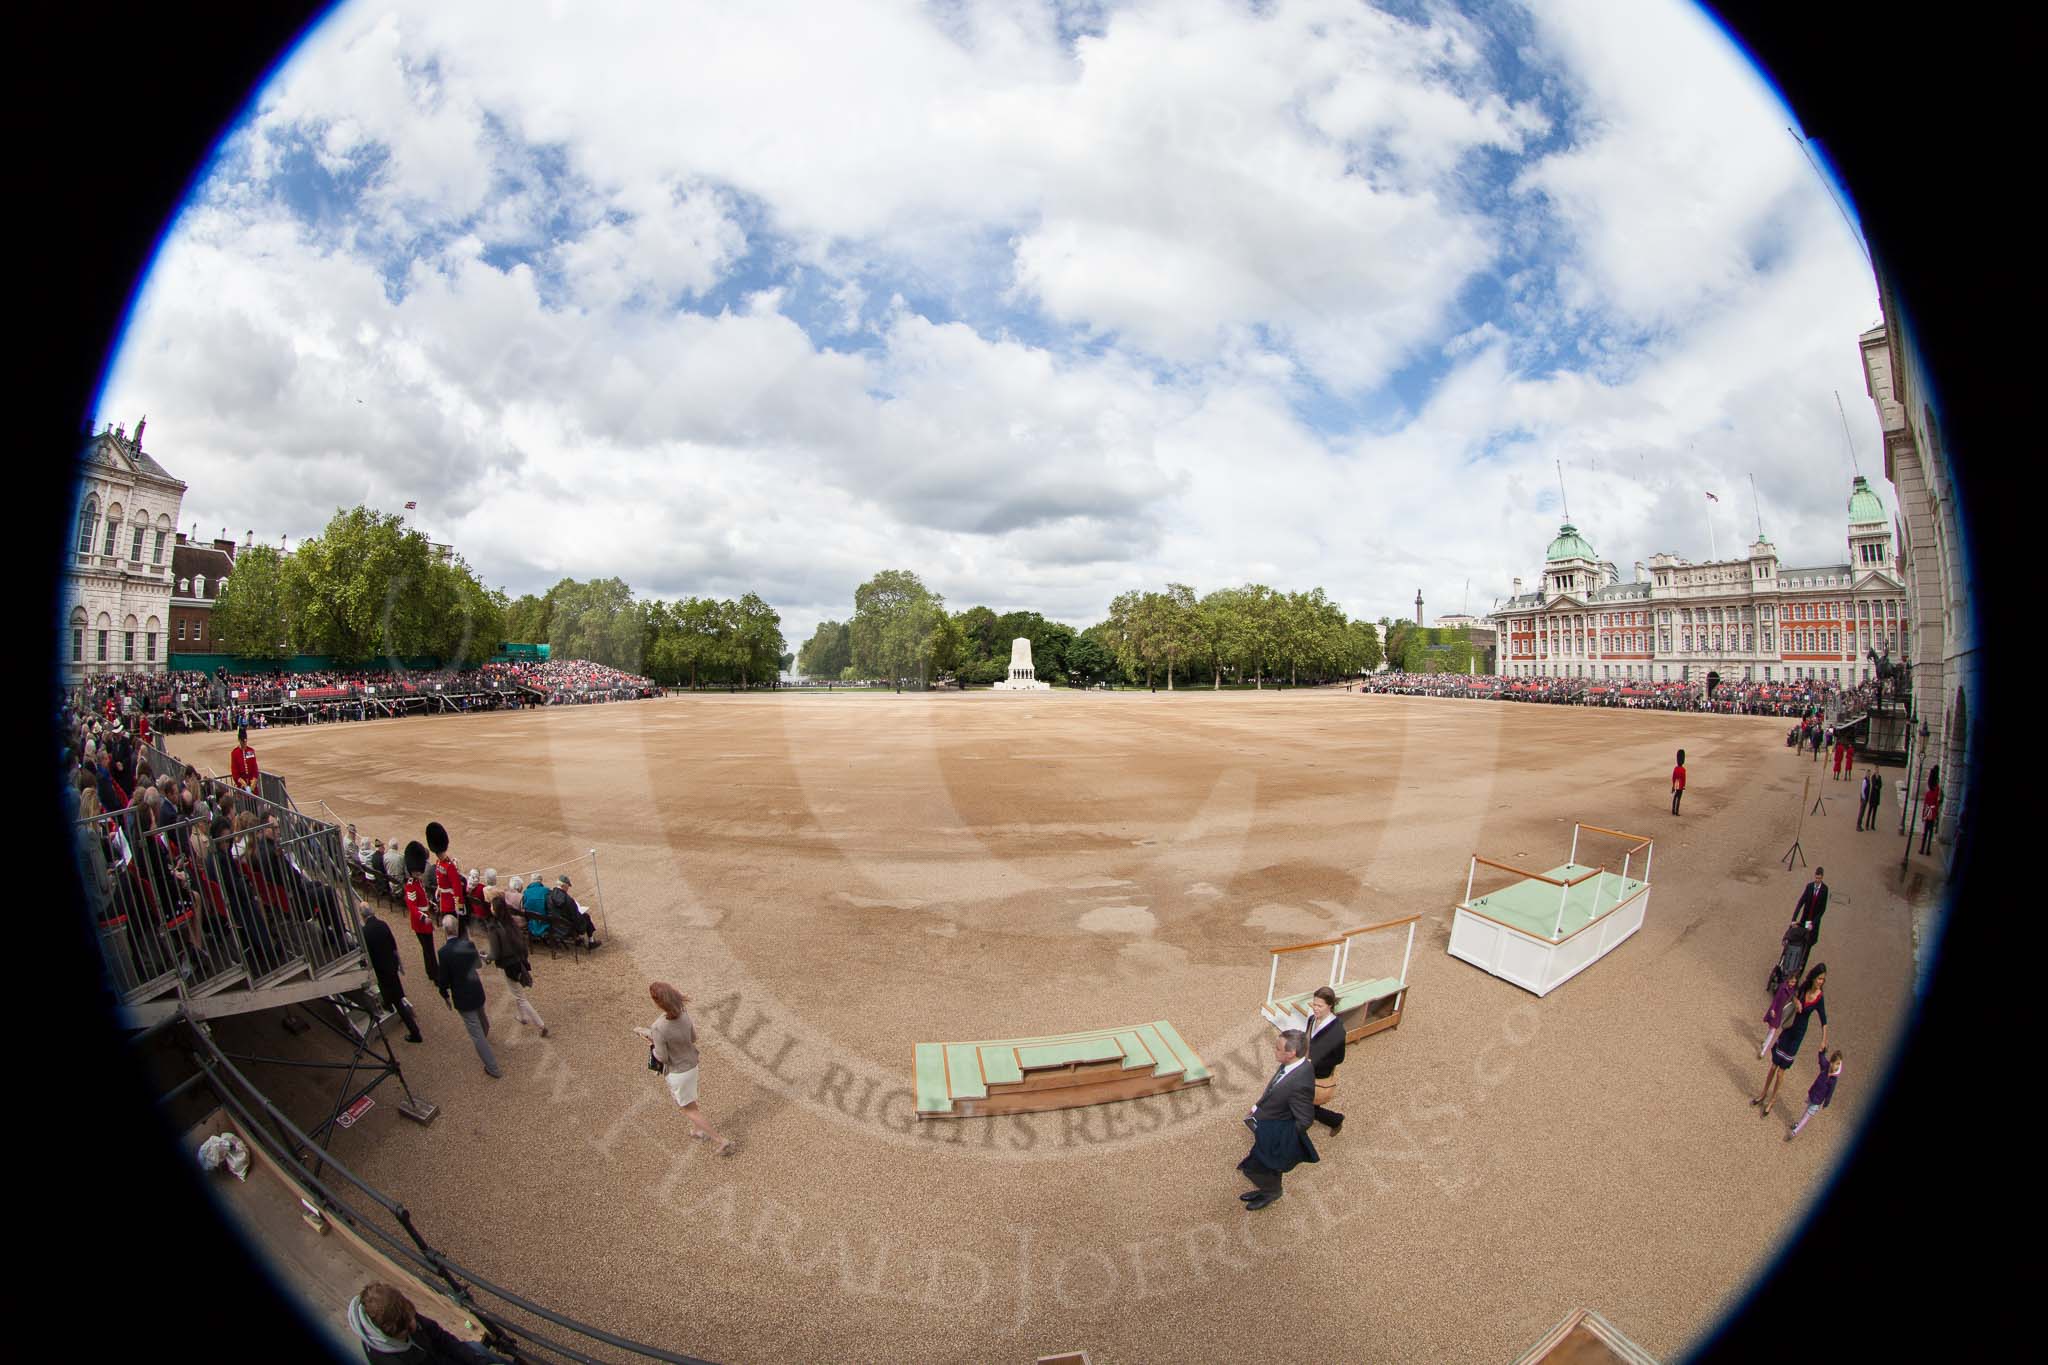 The Colonel's Review 2012: The whole of Horse Guards Parade, wit the last spectators coming in.
Horse Guards Parade, Westminster,
London SW1,

United Kingdom,
on 09 June 2012 at 09:58, image #12